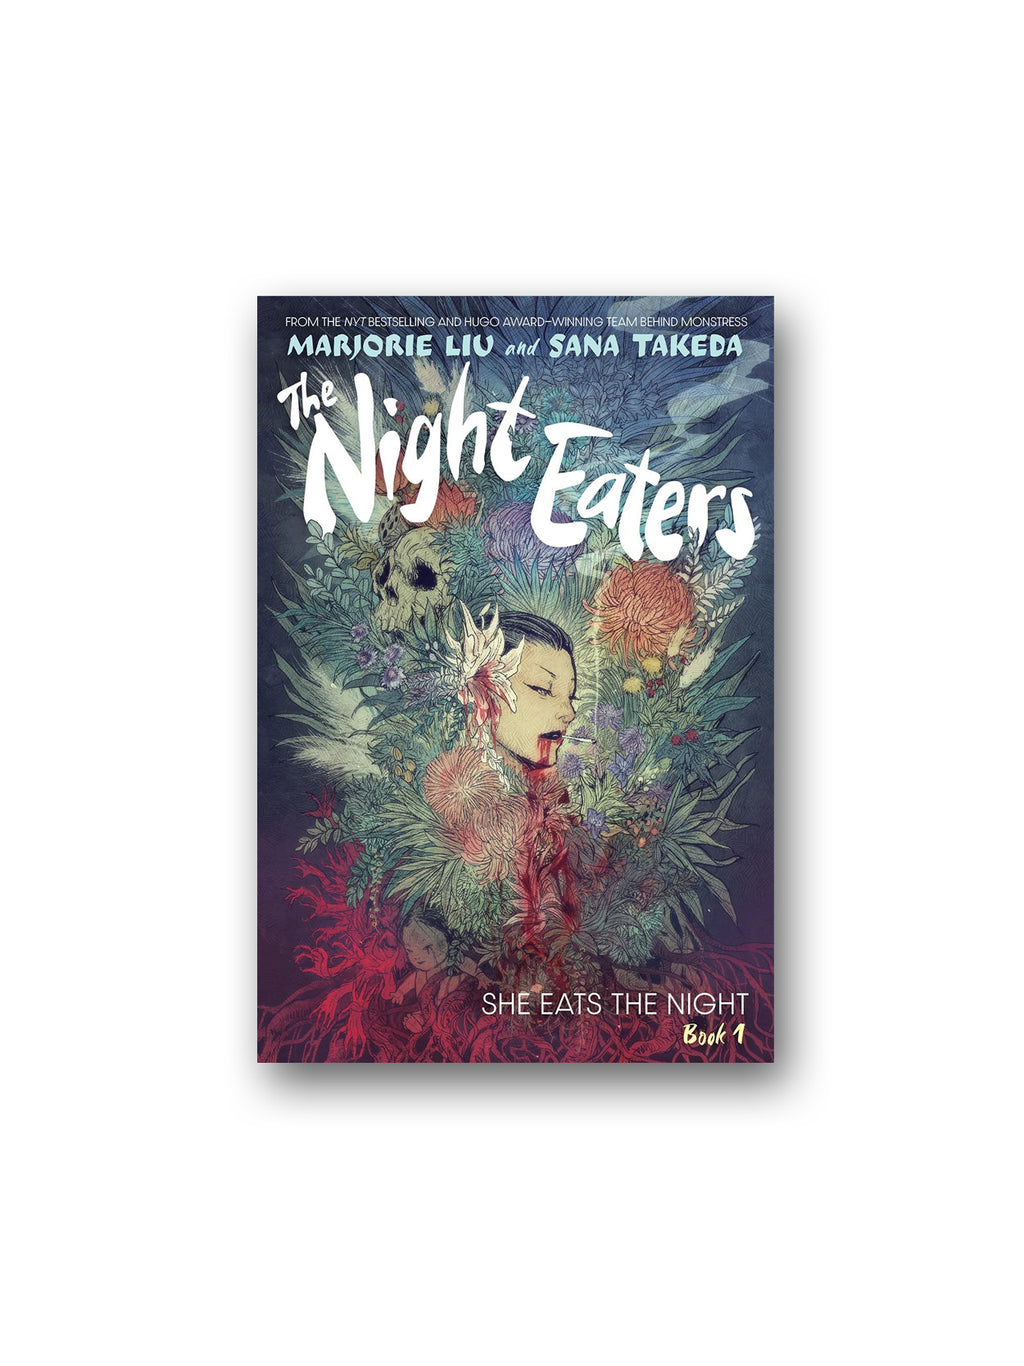 The Night Eaters: She Eats the Night (Book 1)